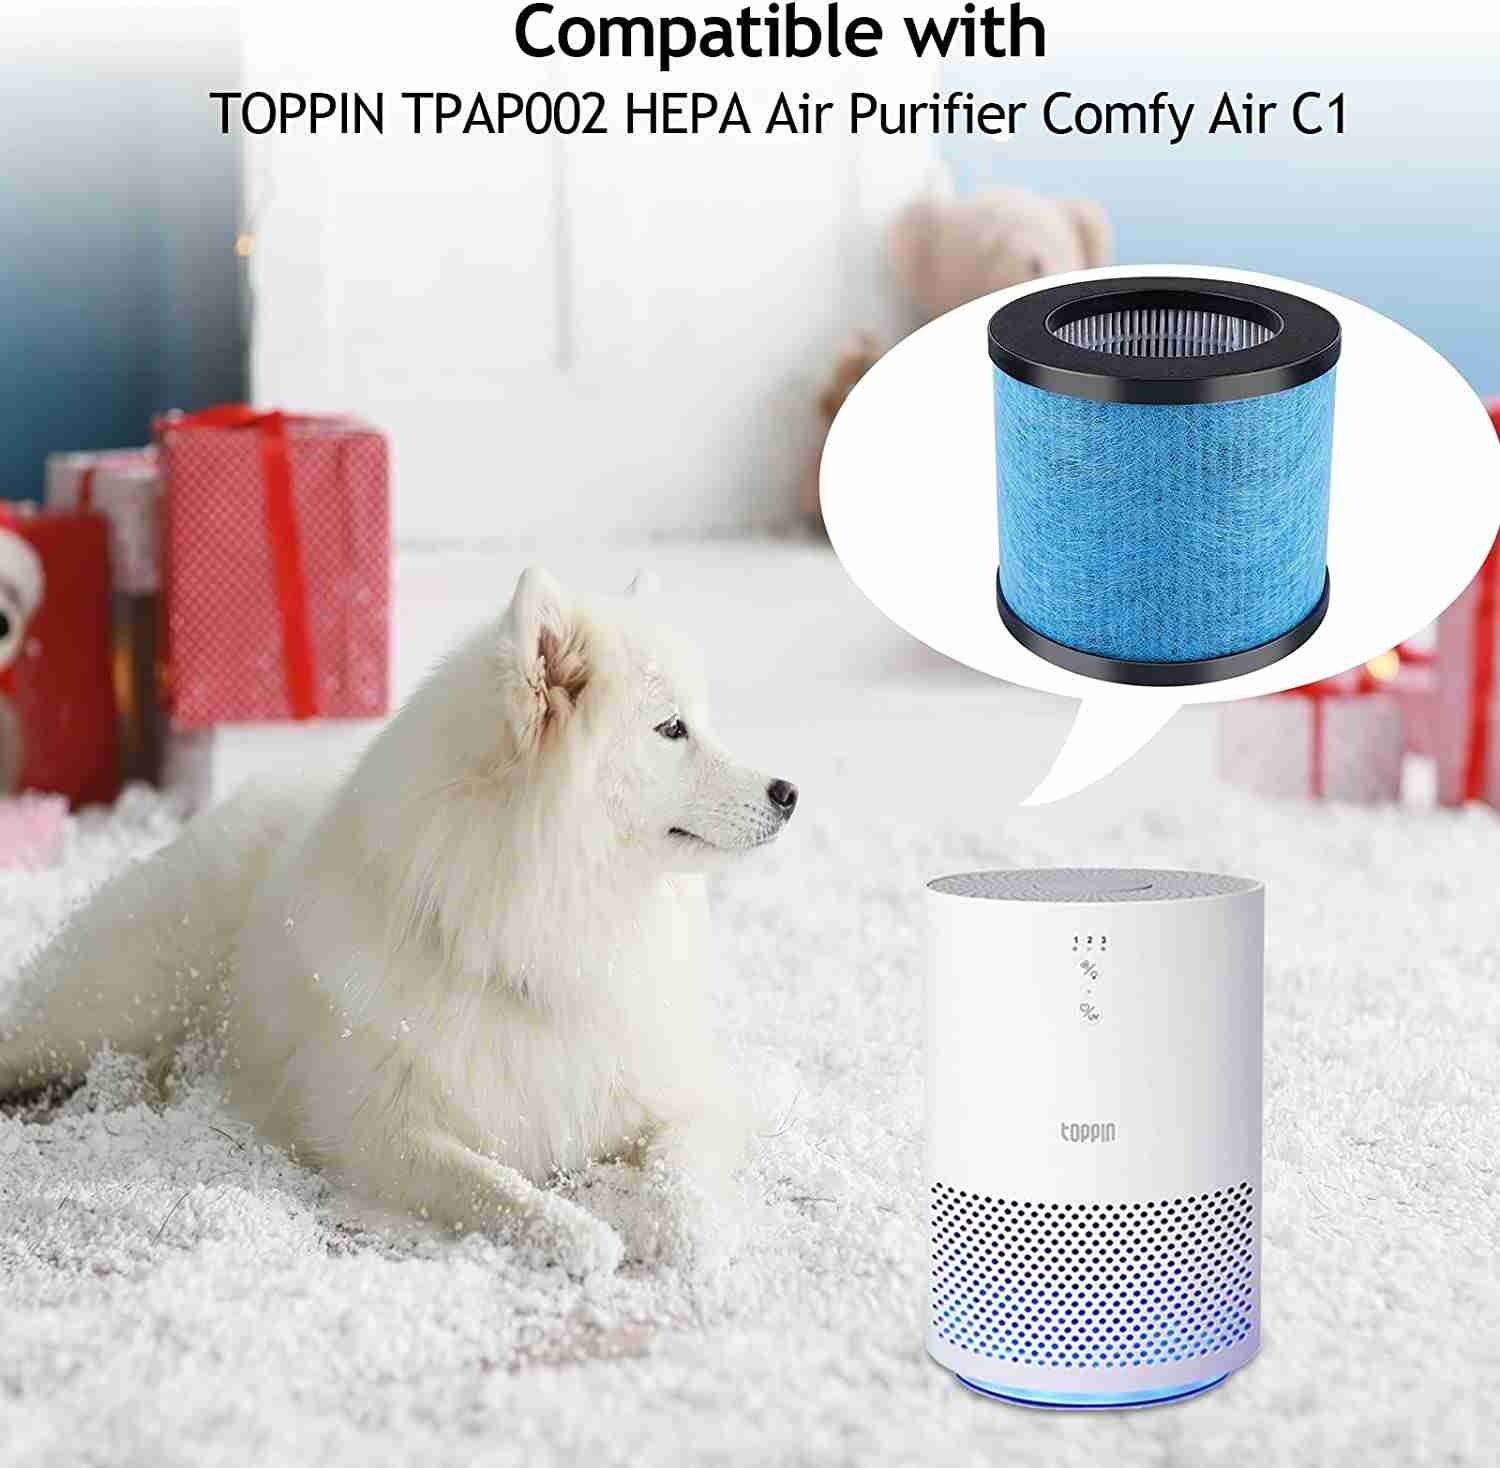 KEEPOW TPAP002 Hepa Filter Replacement Compatible with TOPPIN TPAP002 HEPA Air Purifier Comfy Air C1, Part # TPFF002 (2 Pack)